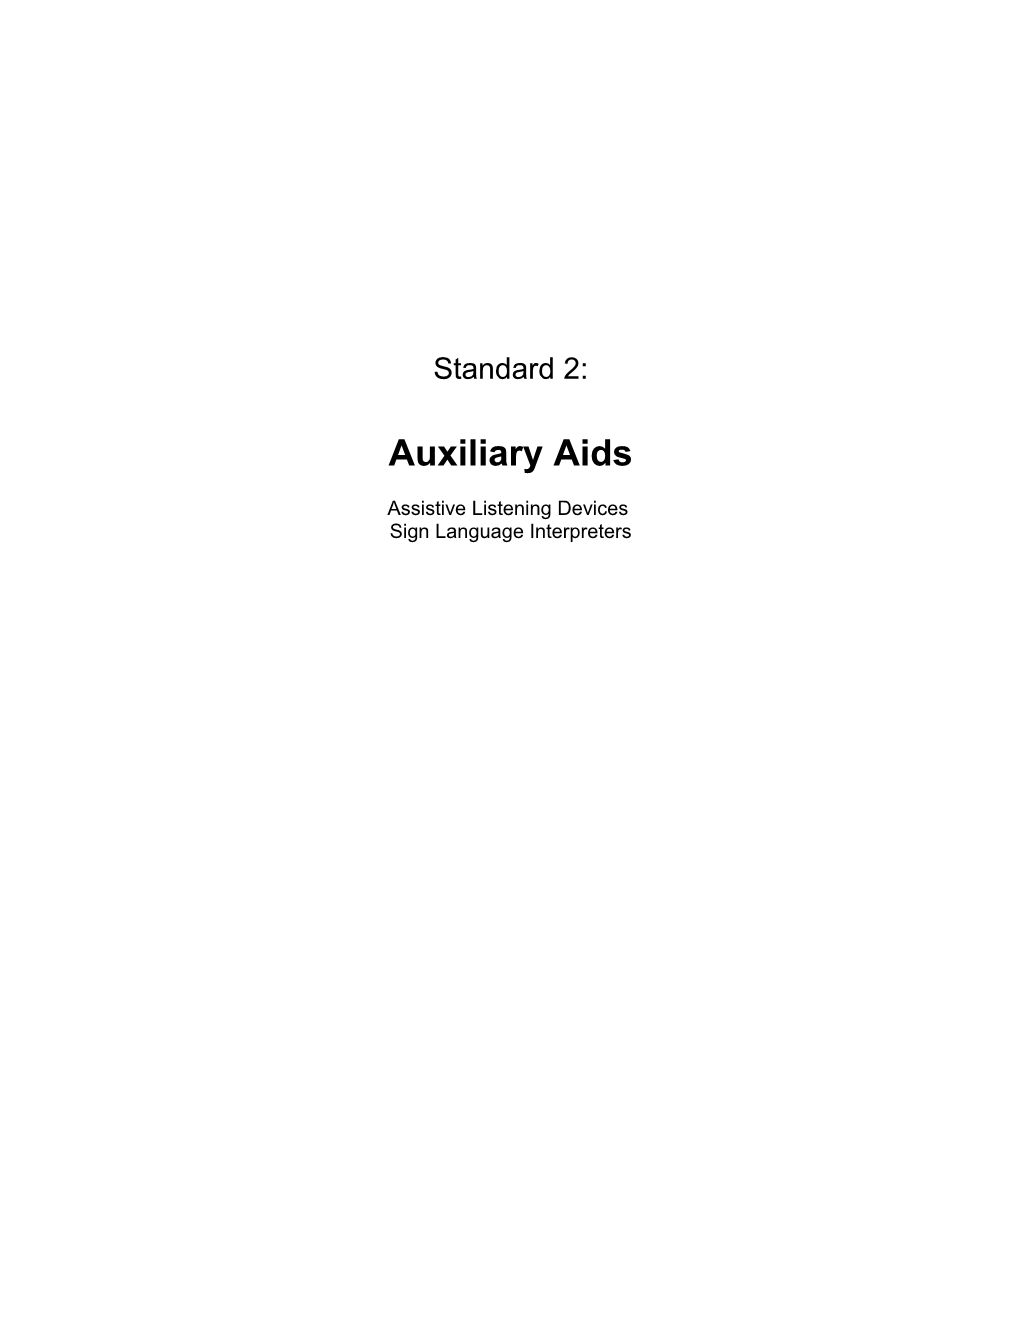 Module 2: Auxiliary Aids